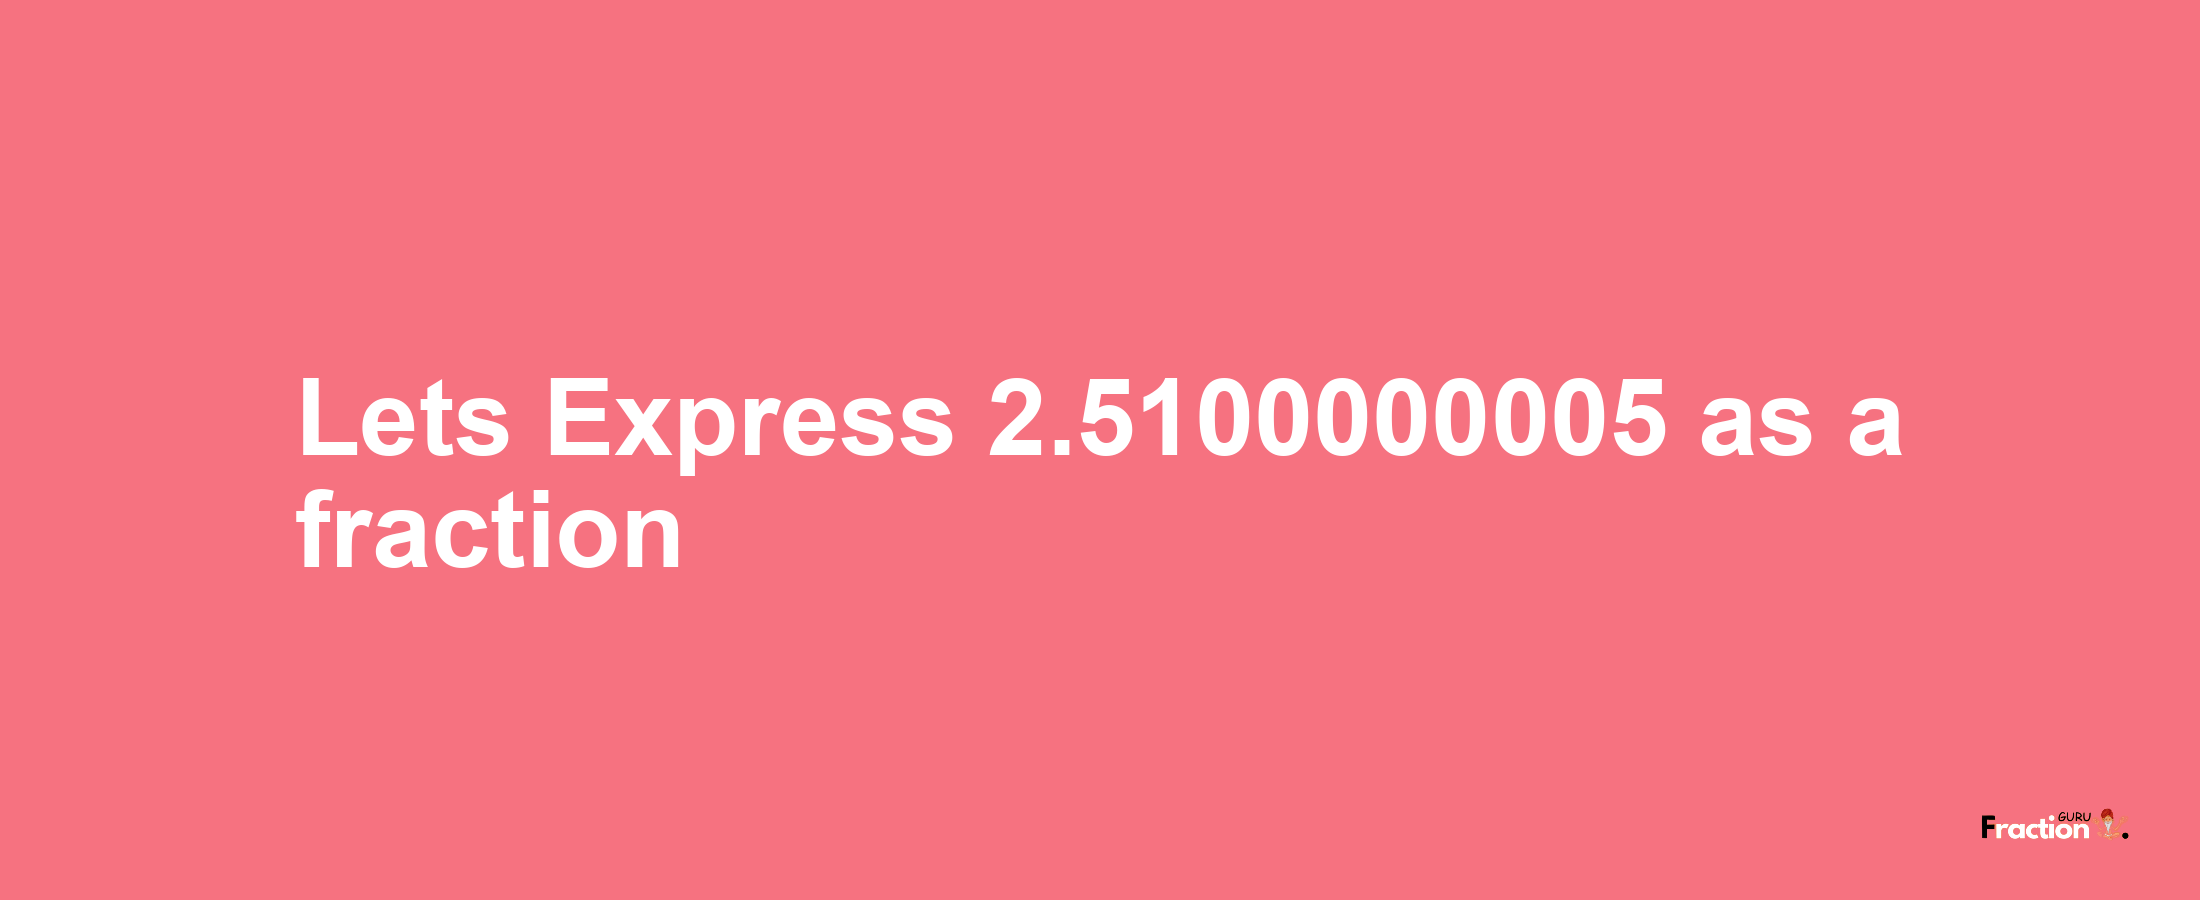 Lets Express 2.5100000005 as afraction